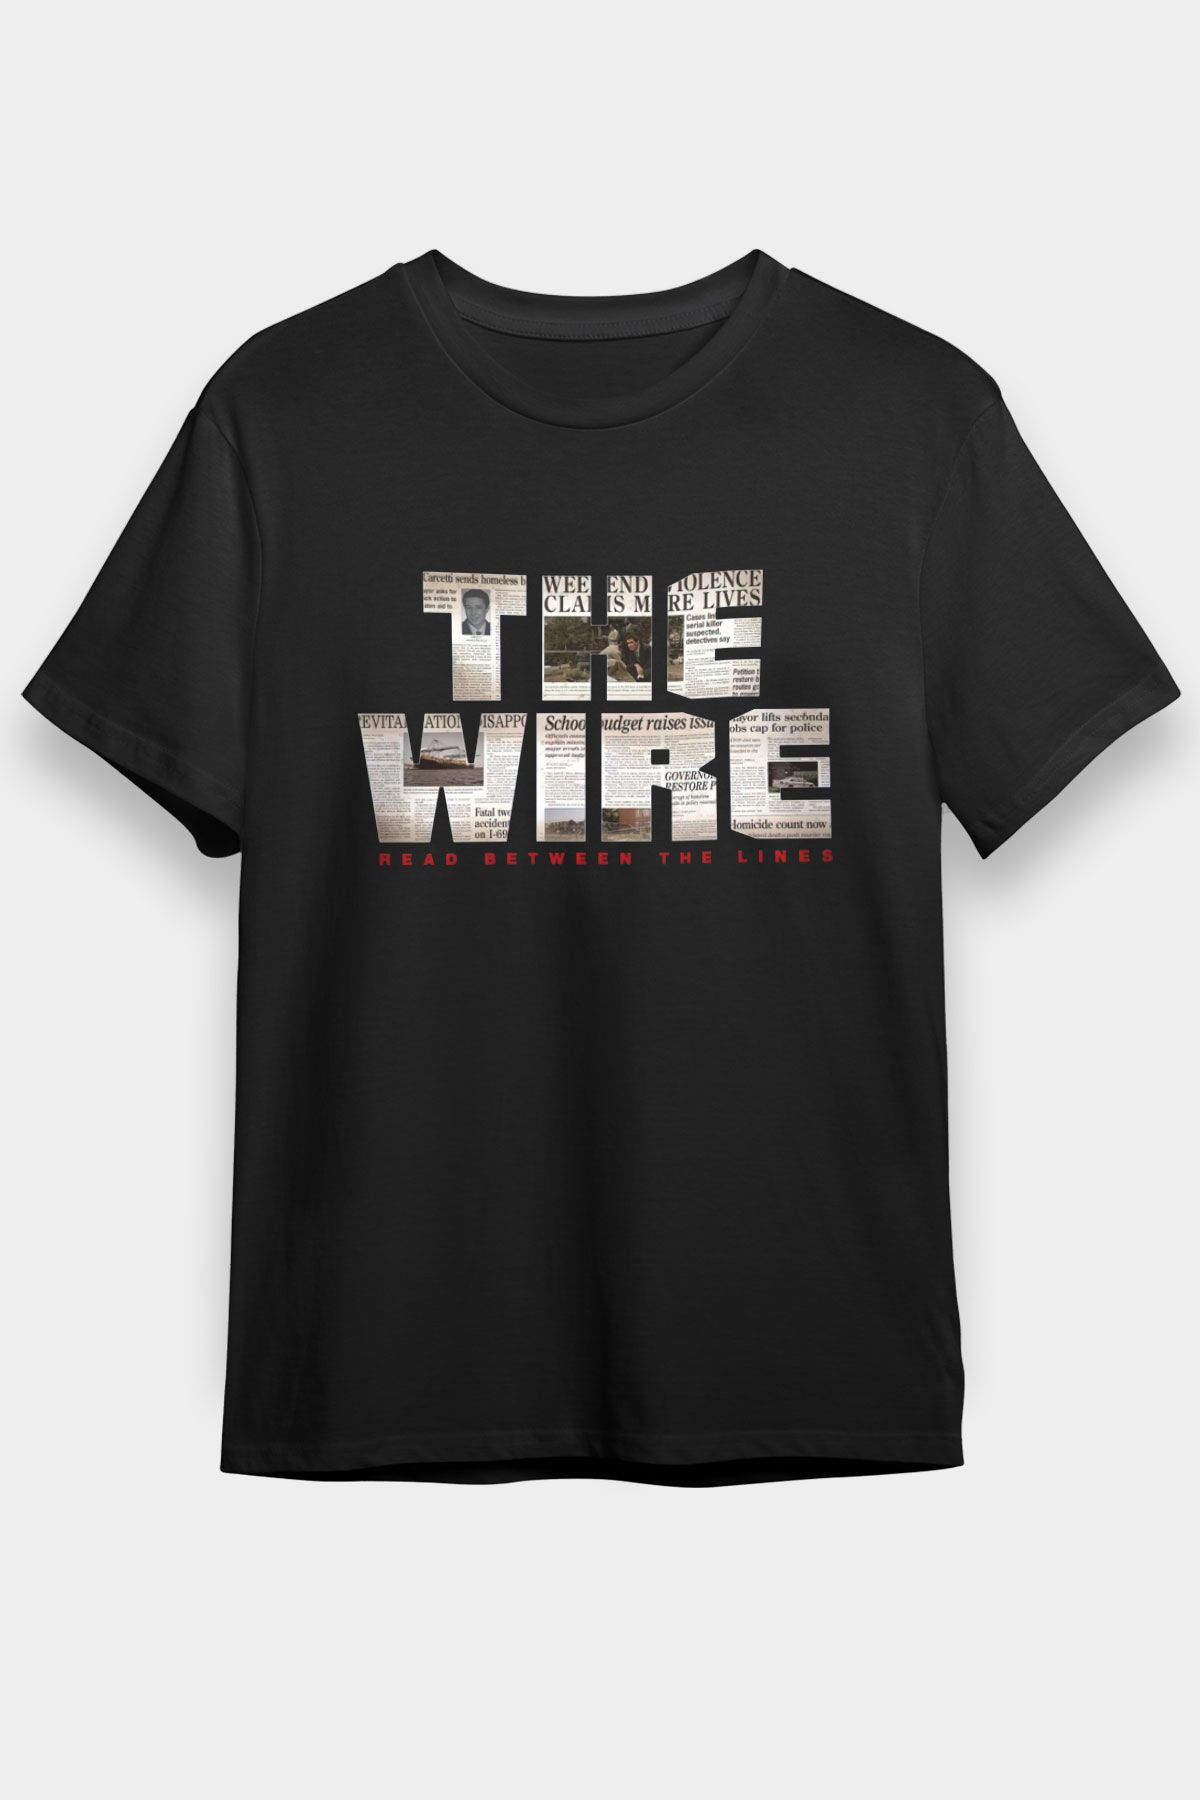 The Wire T shirt,Movie , Tv and Games Tshirt /